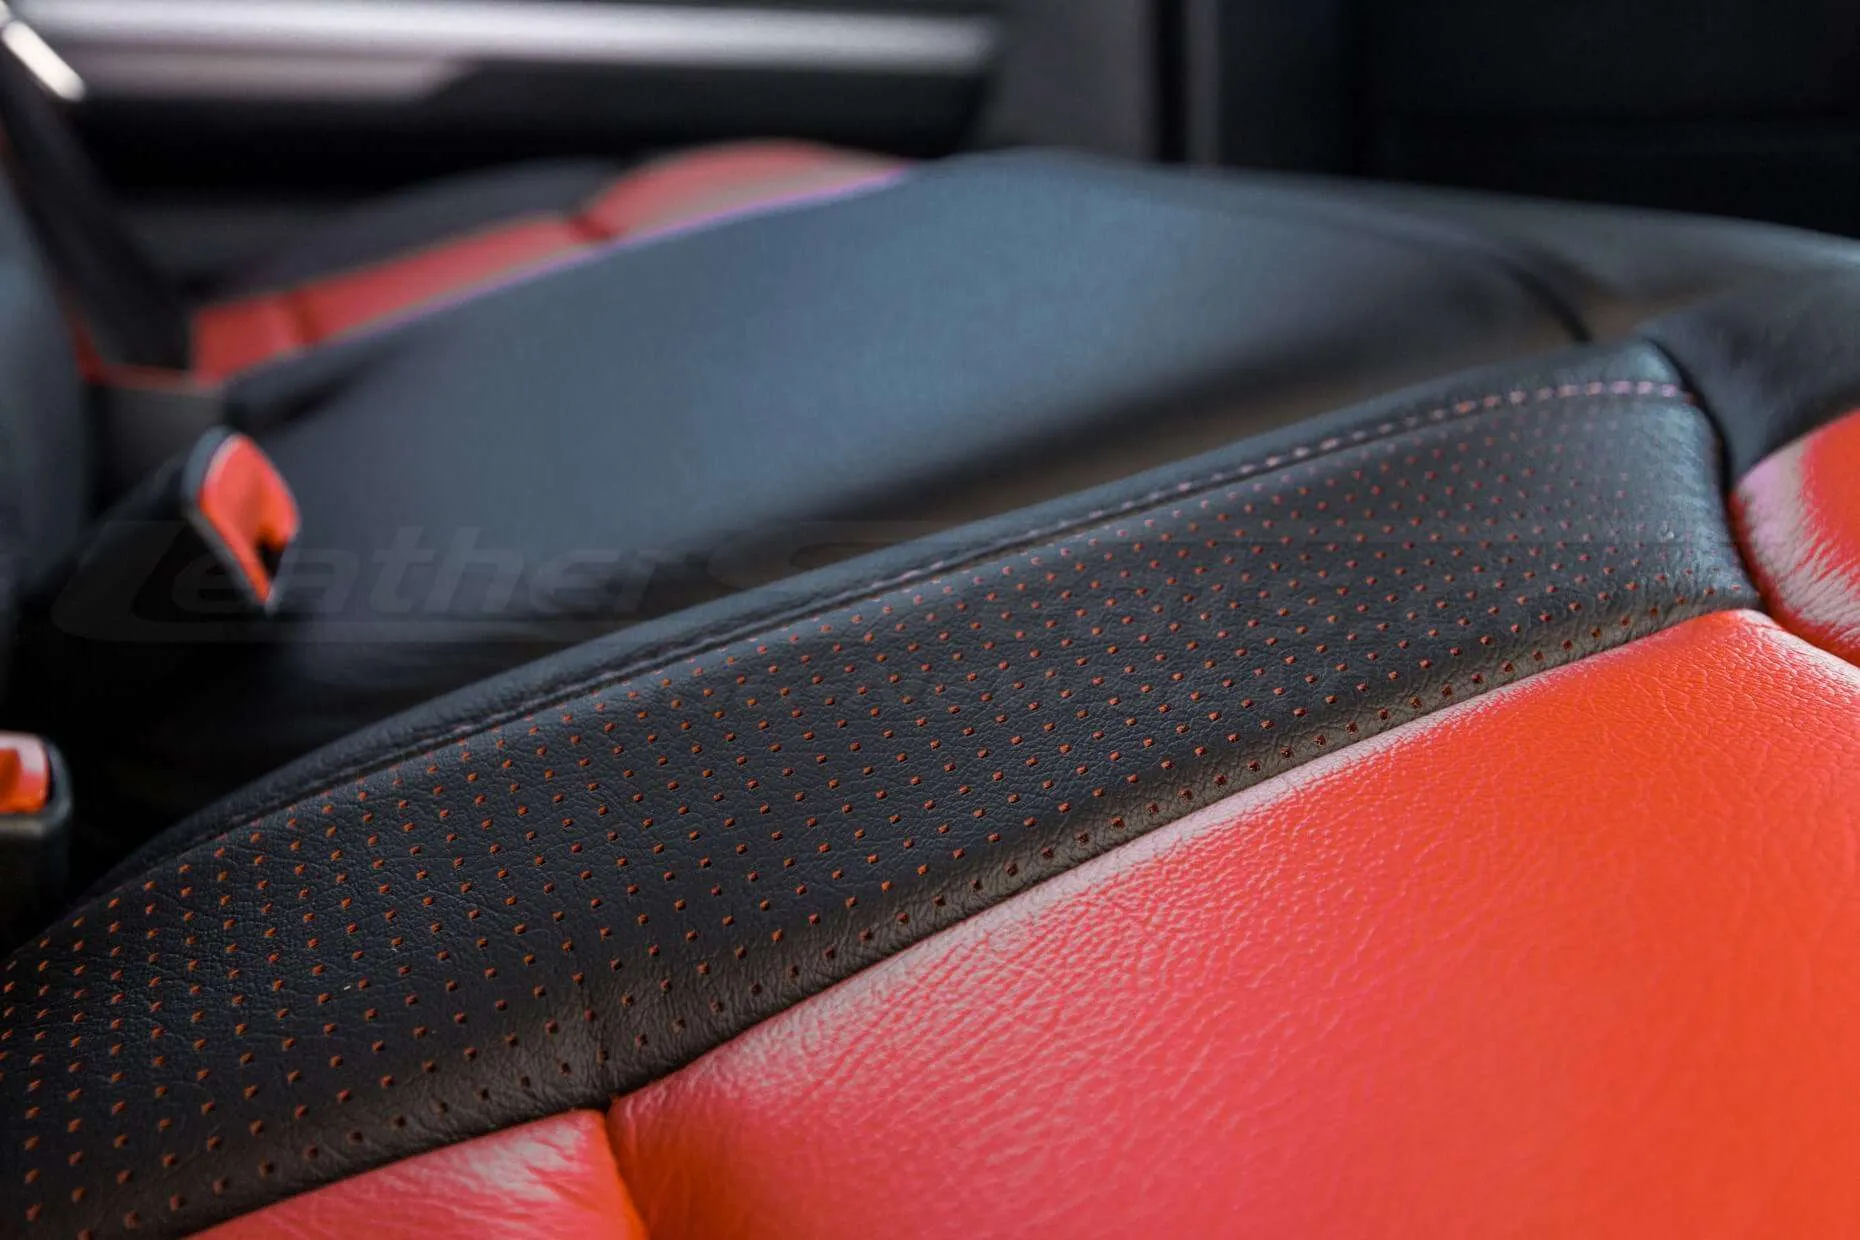 Toyota Tundra Leather Kit Installed - Black & Bright Red - Seat cushion wing close-up